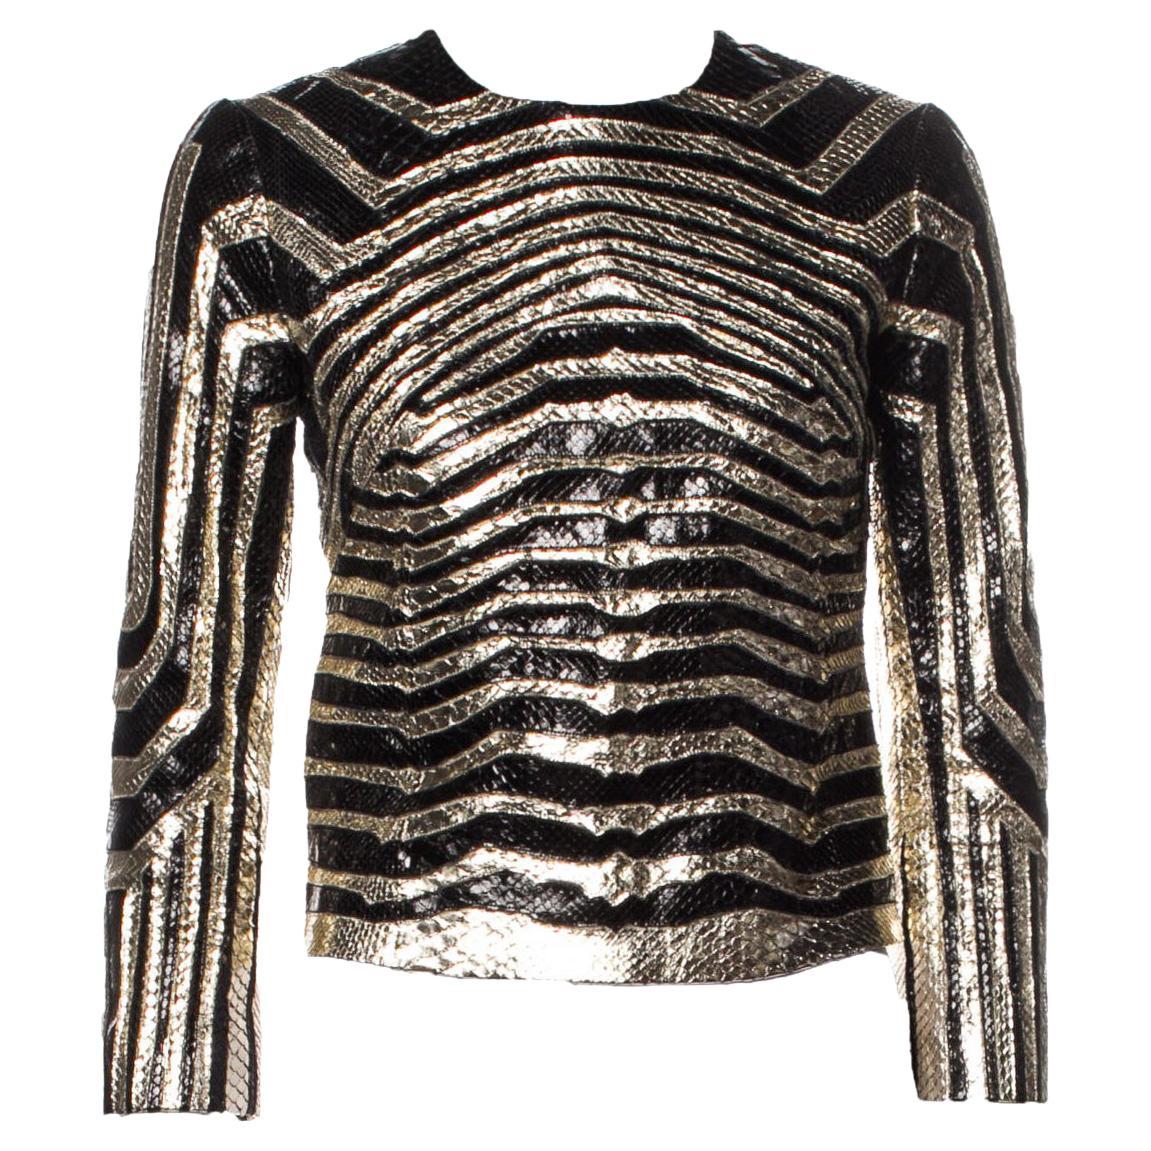 Gucci Python Runway Black Gold Jacket as seen on JLO *Follow the Leader* song S For Sale